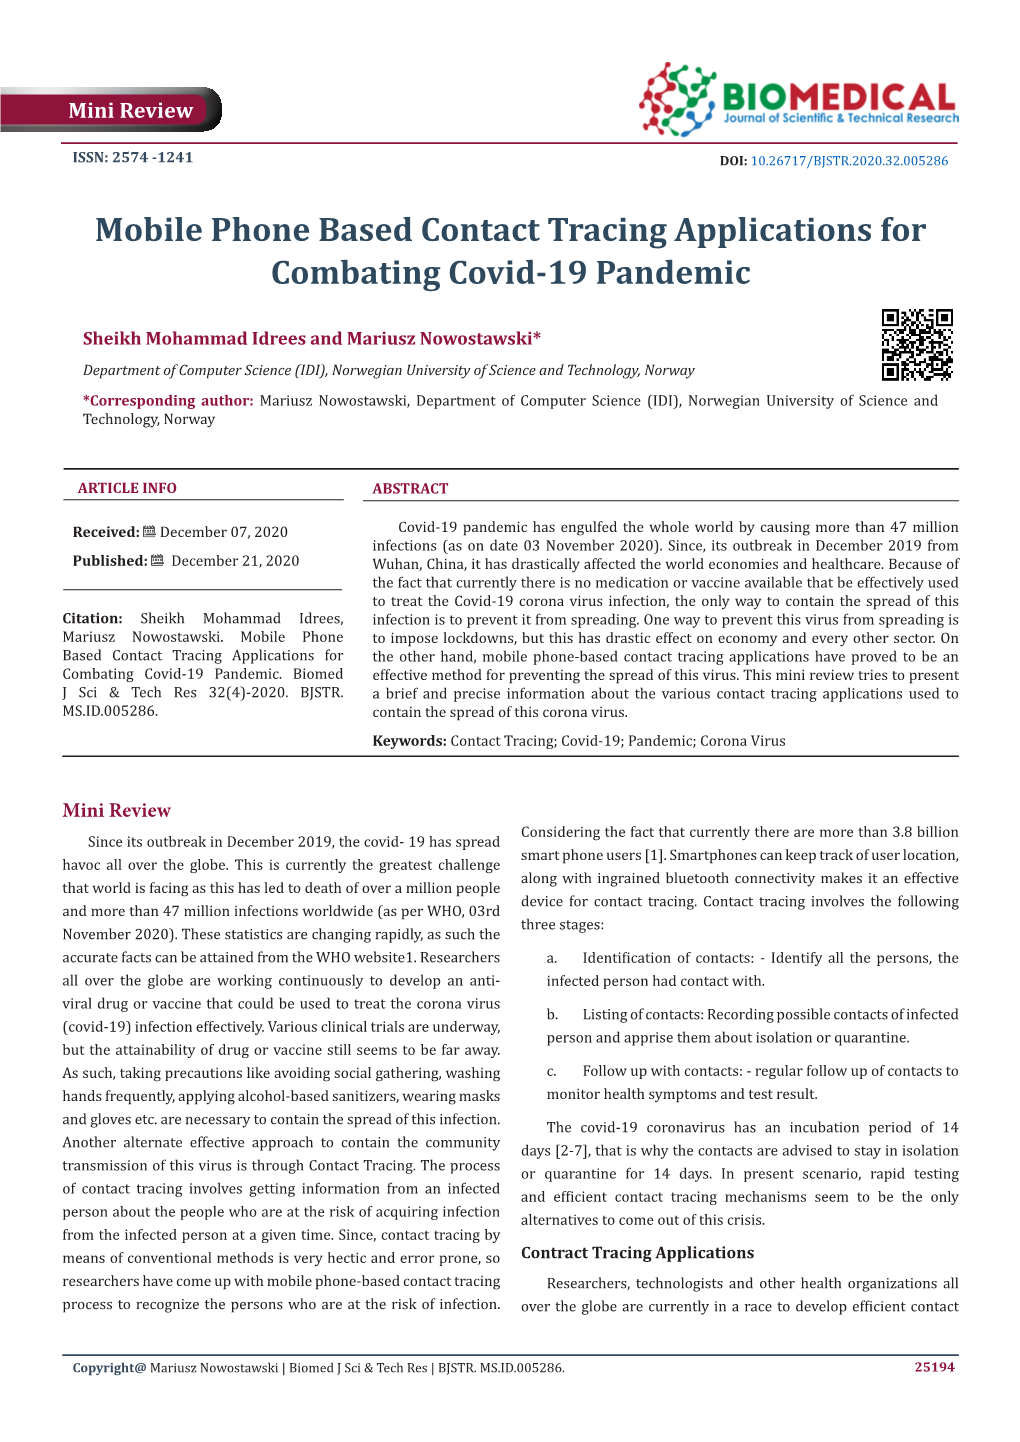 Mobile Phone Based Contact Tracing Applications for Combating Covid-19 Pandemic